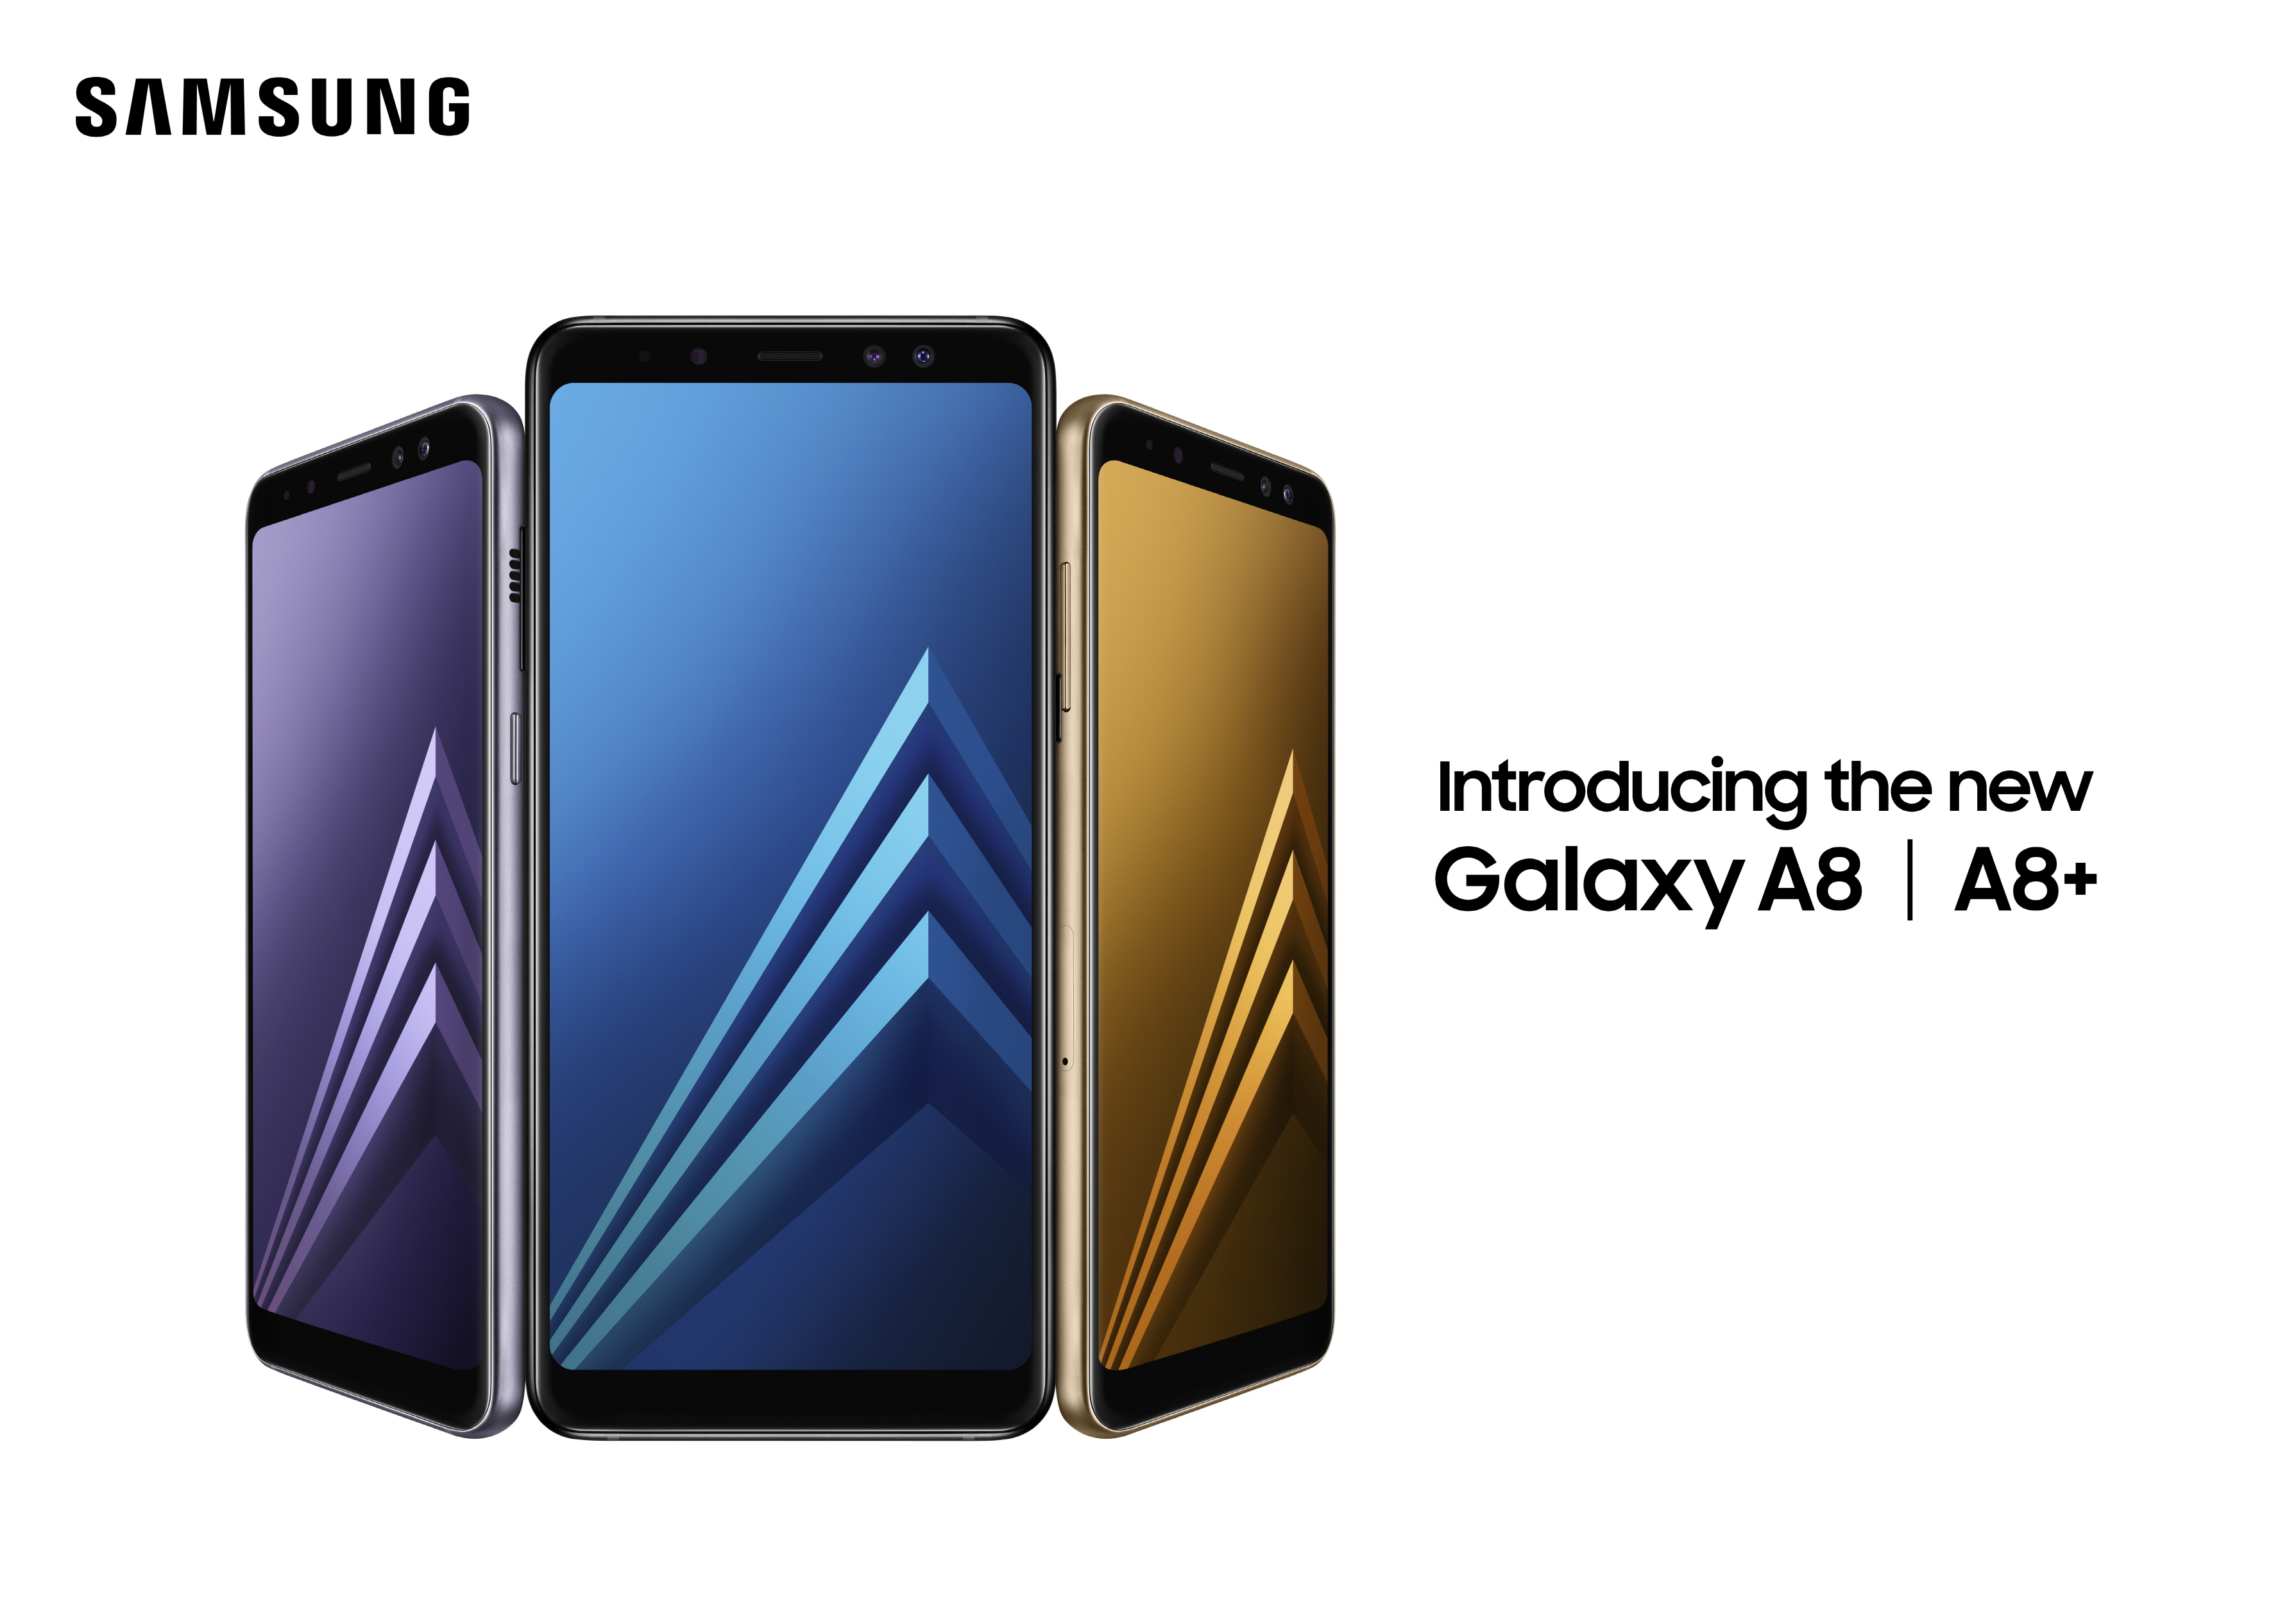 Galaxy A8 (2018) & Galaxy A8+ (2018) announced and come with high-end features for mid-range phones